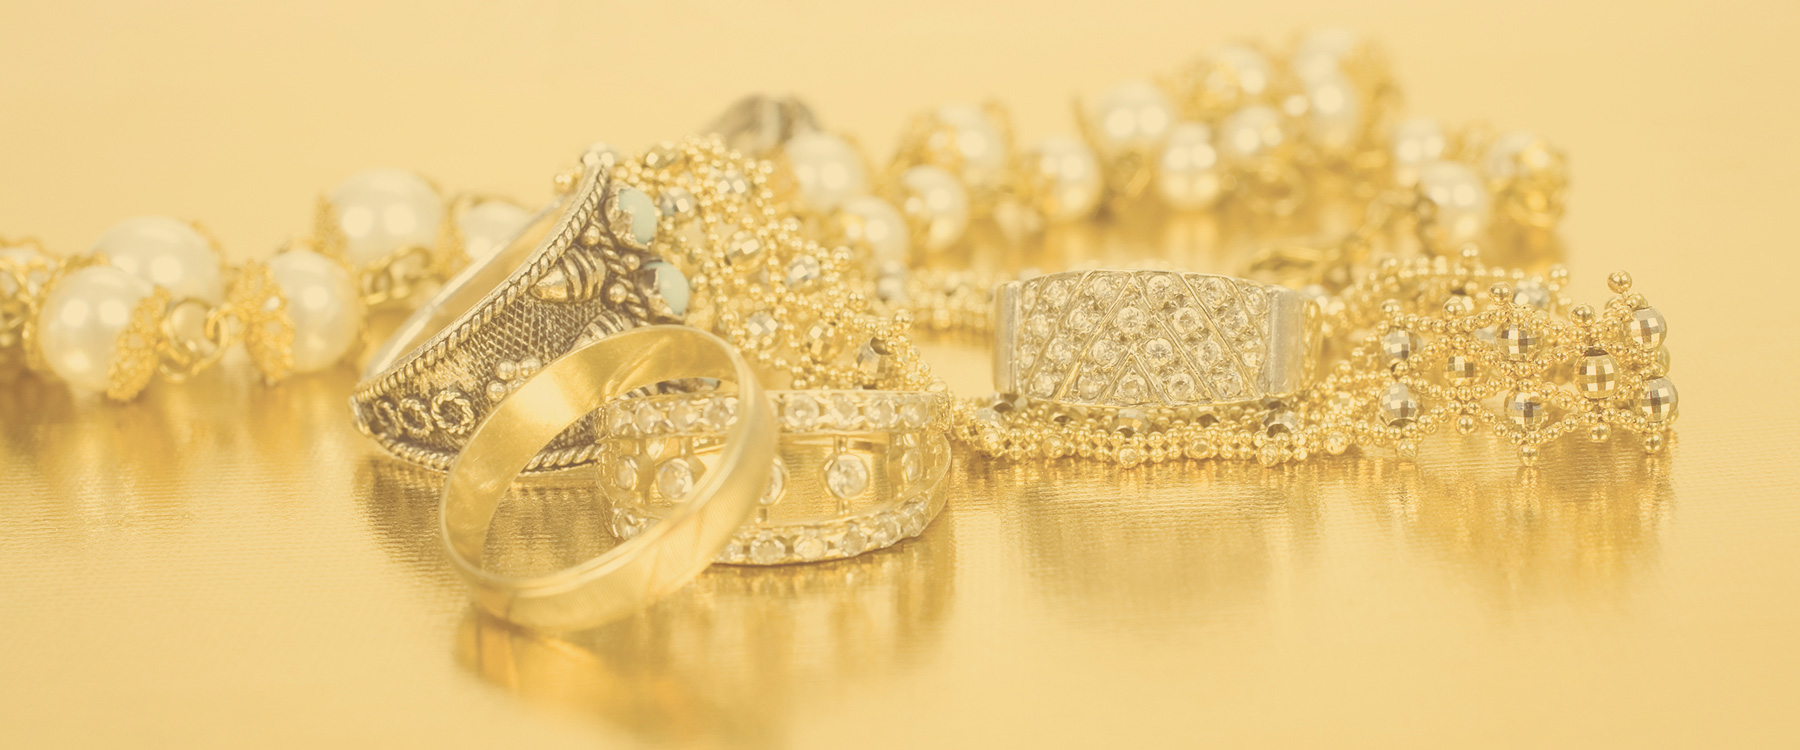 Your trusted source for buying your gold, diamonds, estate jewelry, and luxury watches.